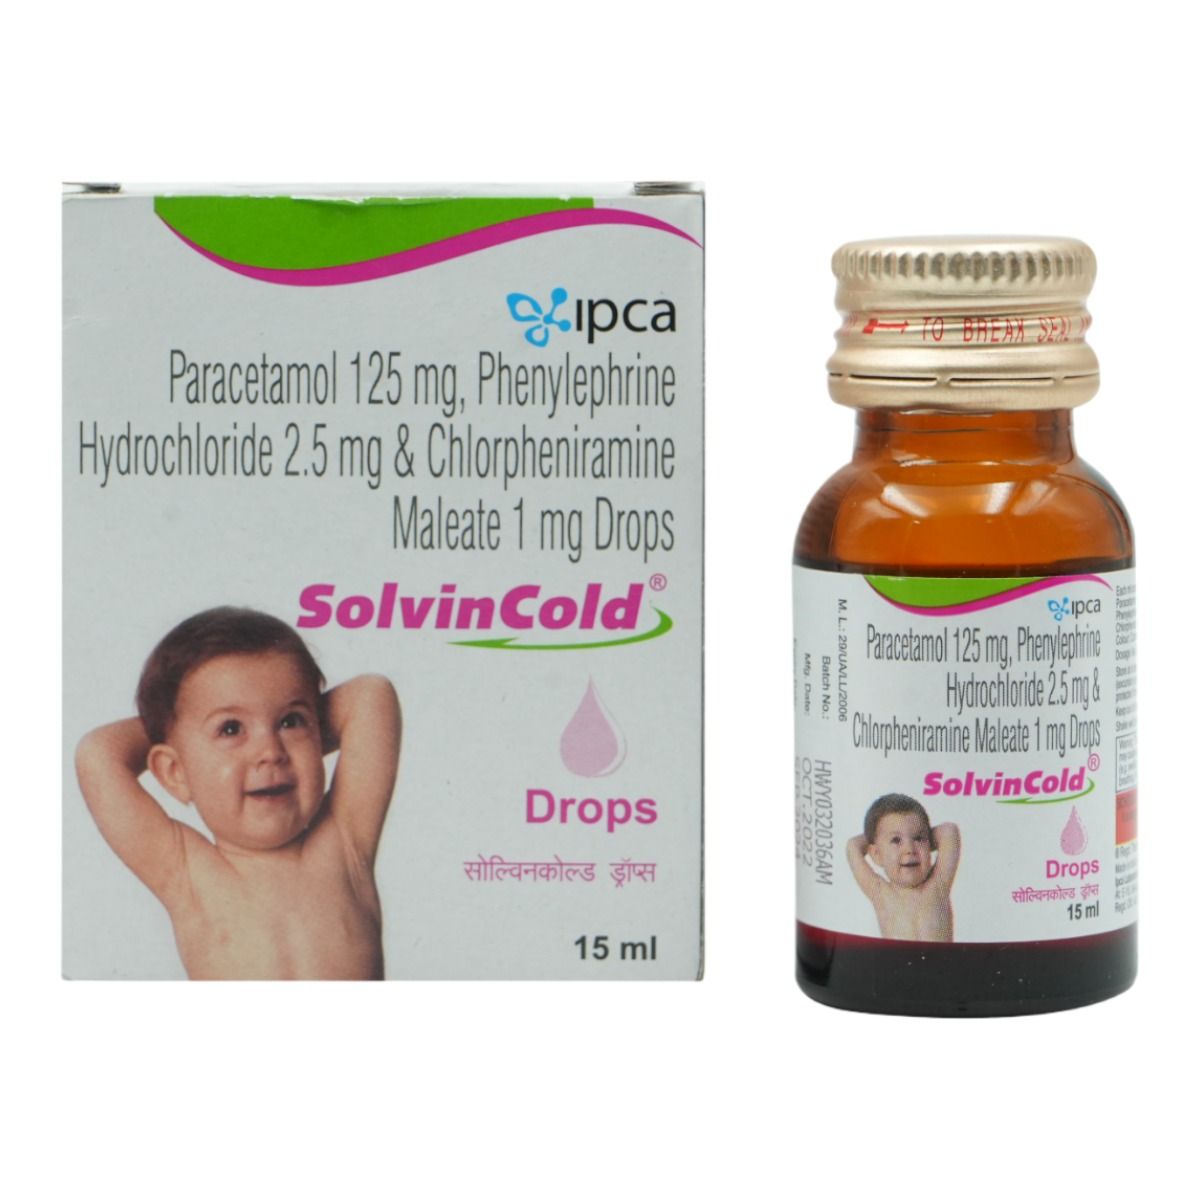 Solvin Cold Drop 15 ml, Pack of 1 Drops